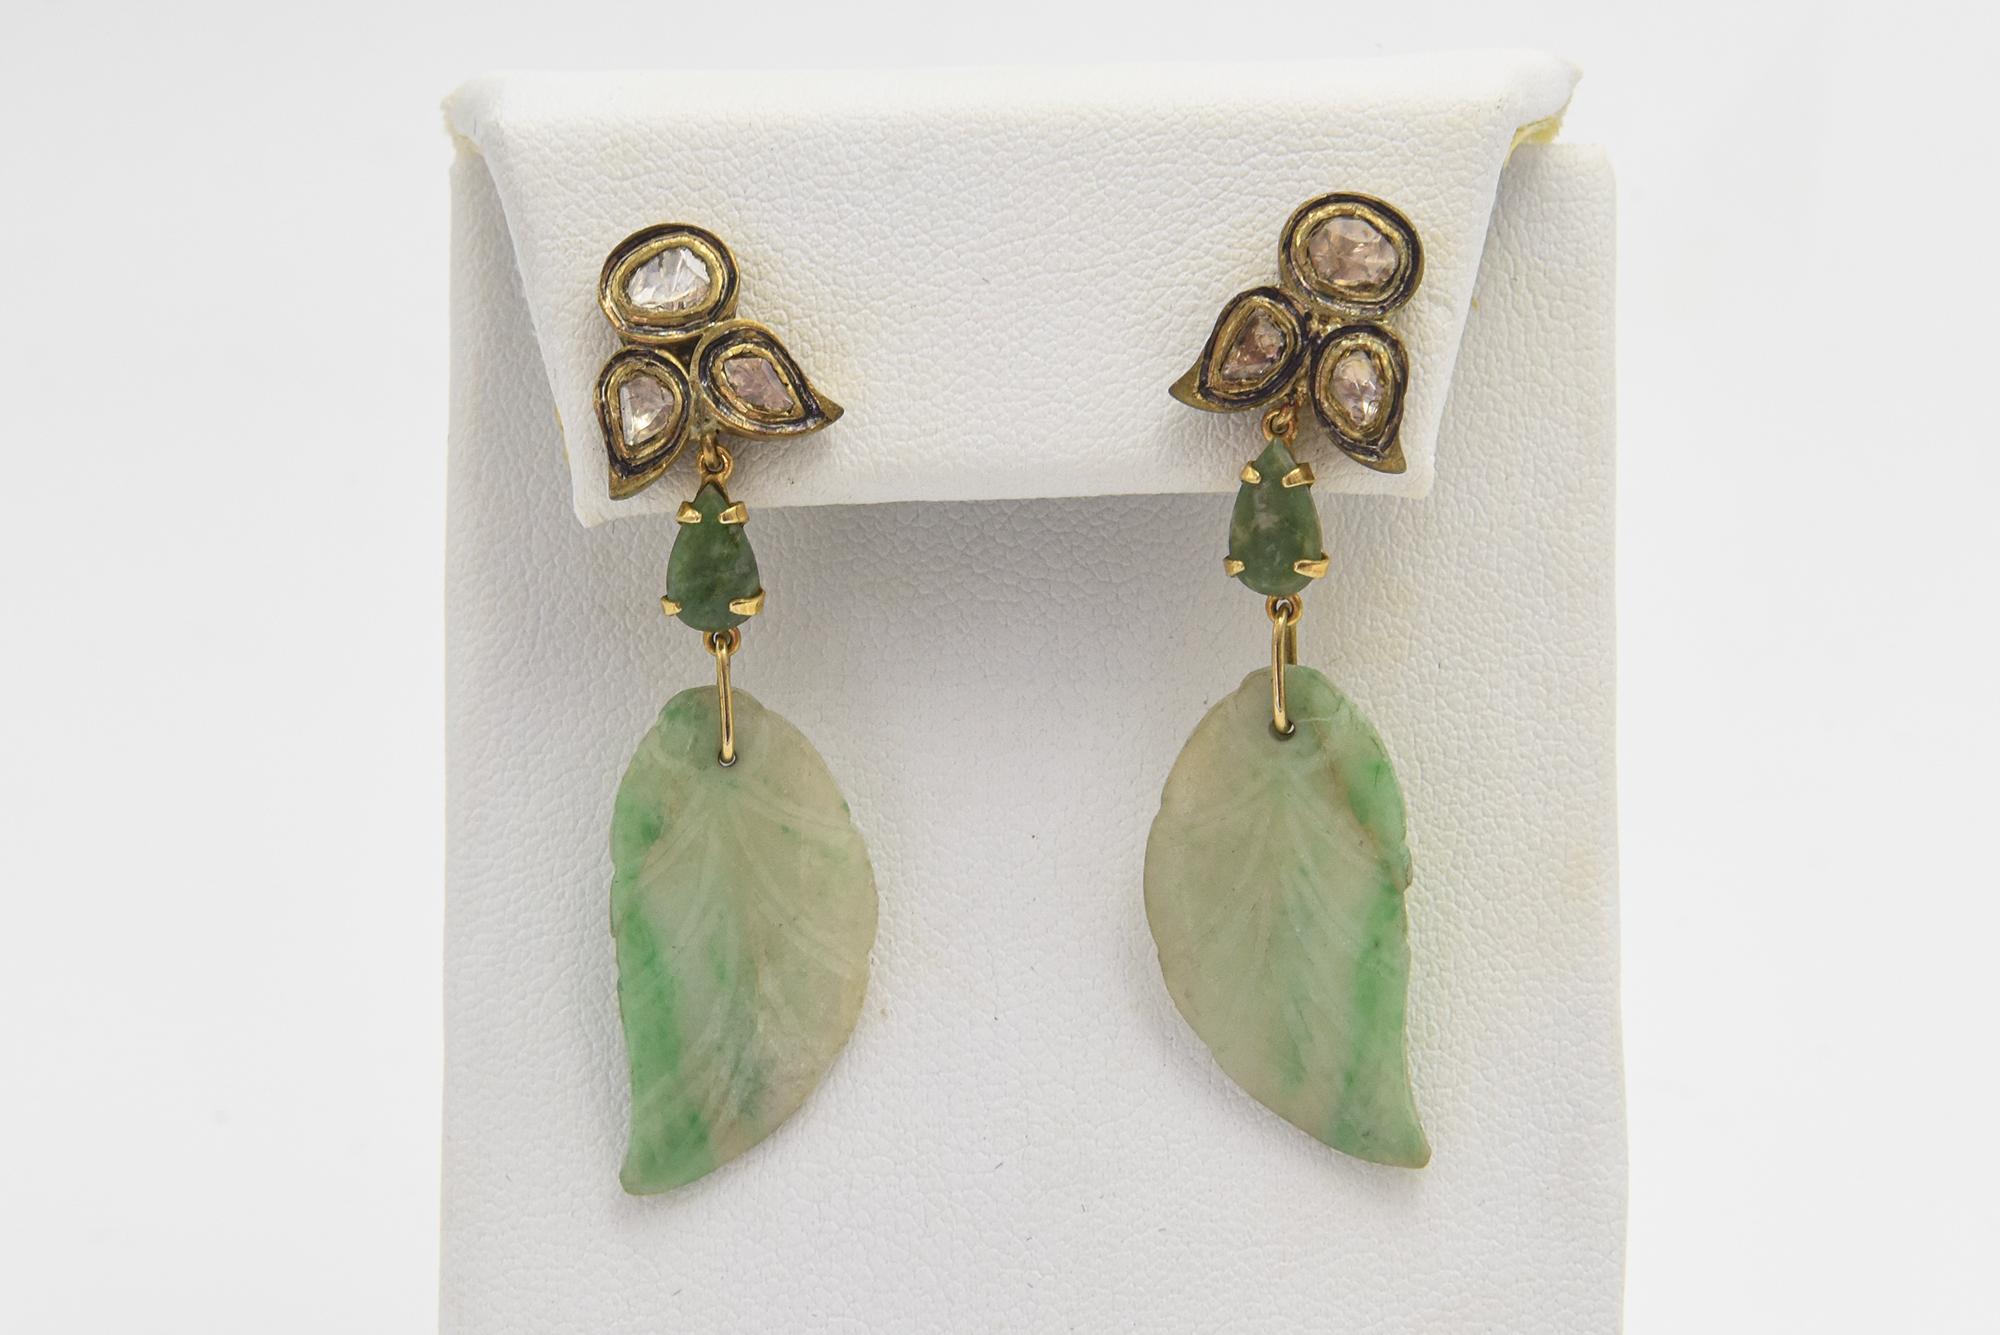 Carved Jade leaves hanging from a diamond leaf made from rose cut diamonds. The mounting is vermeil silver. Post backs so pierced ears are a must.